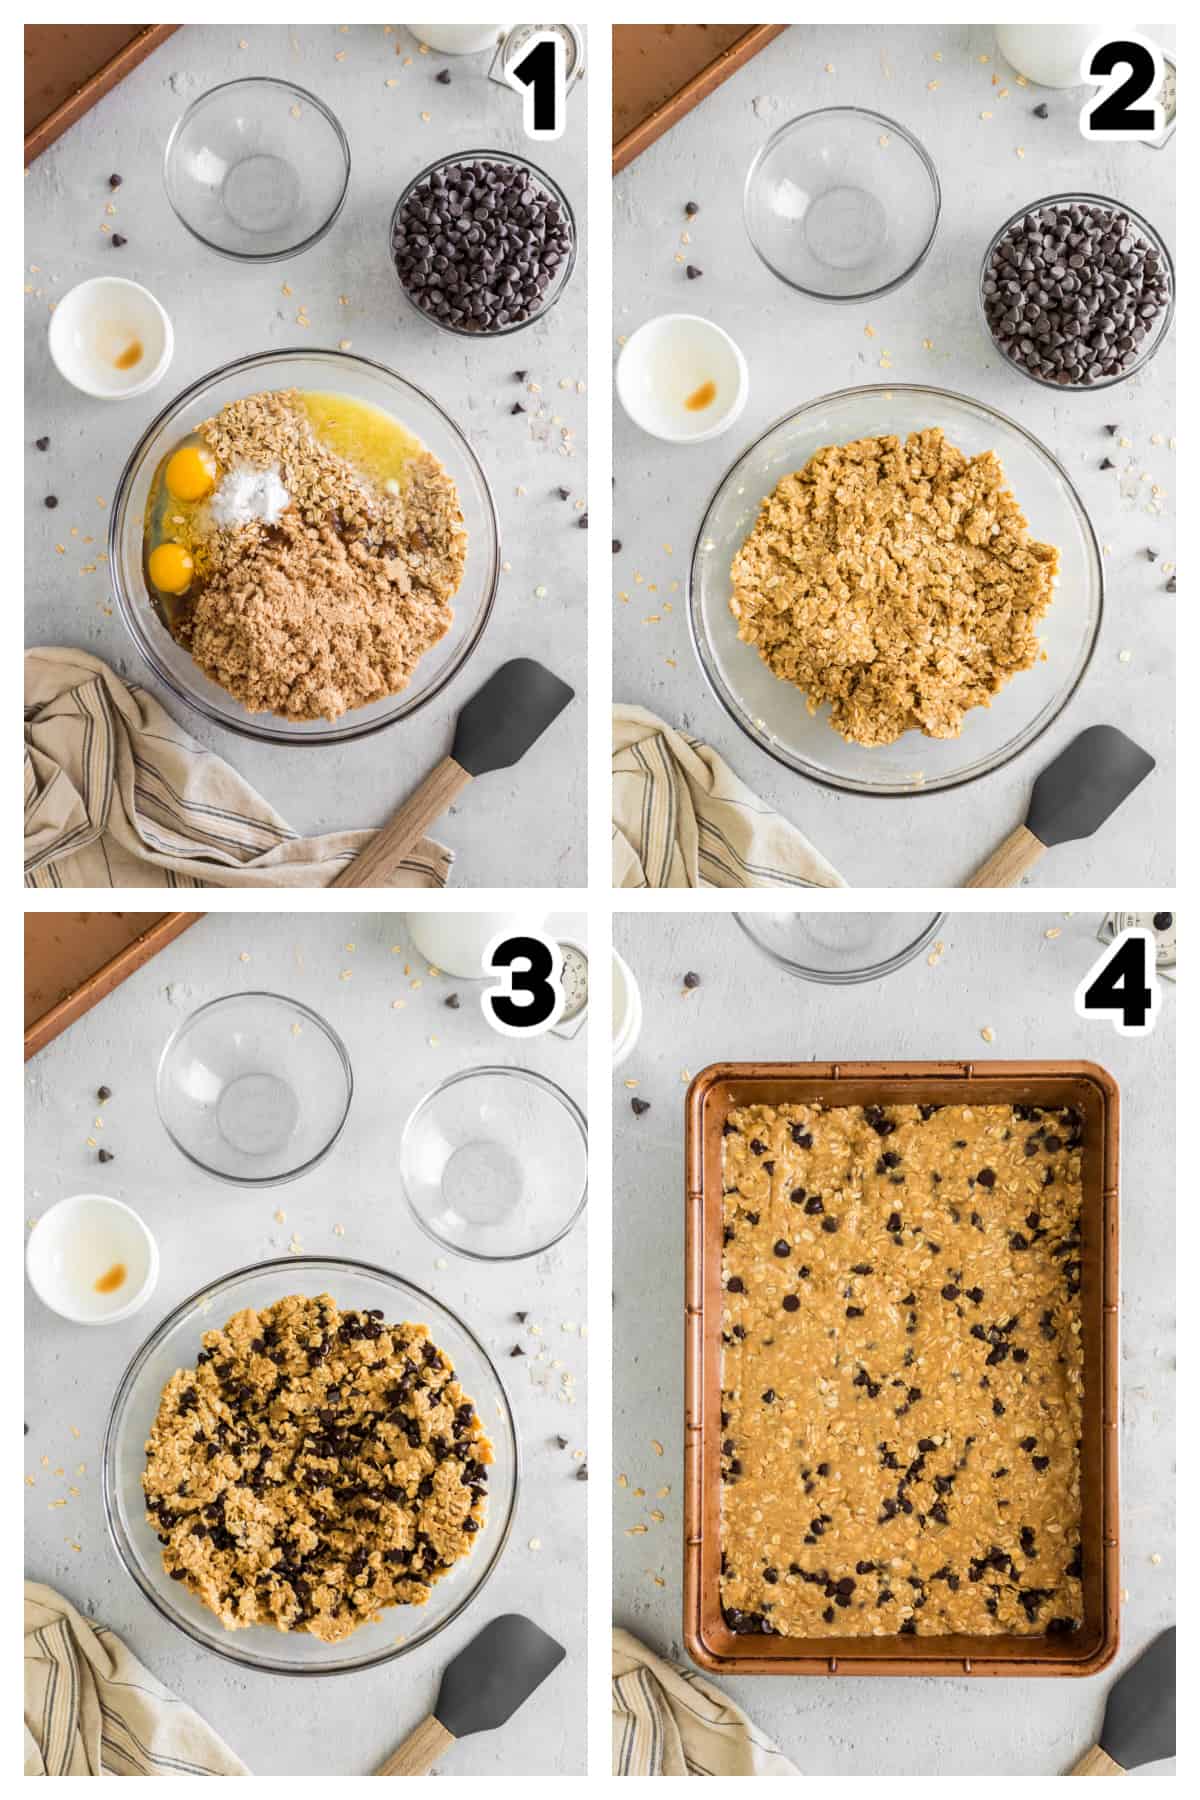 Collage showing how to make oatmeal cookie bar recipe.